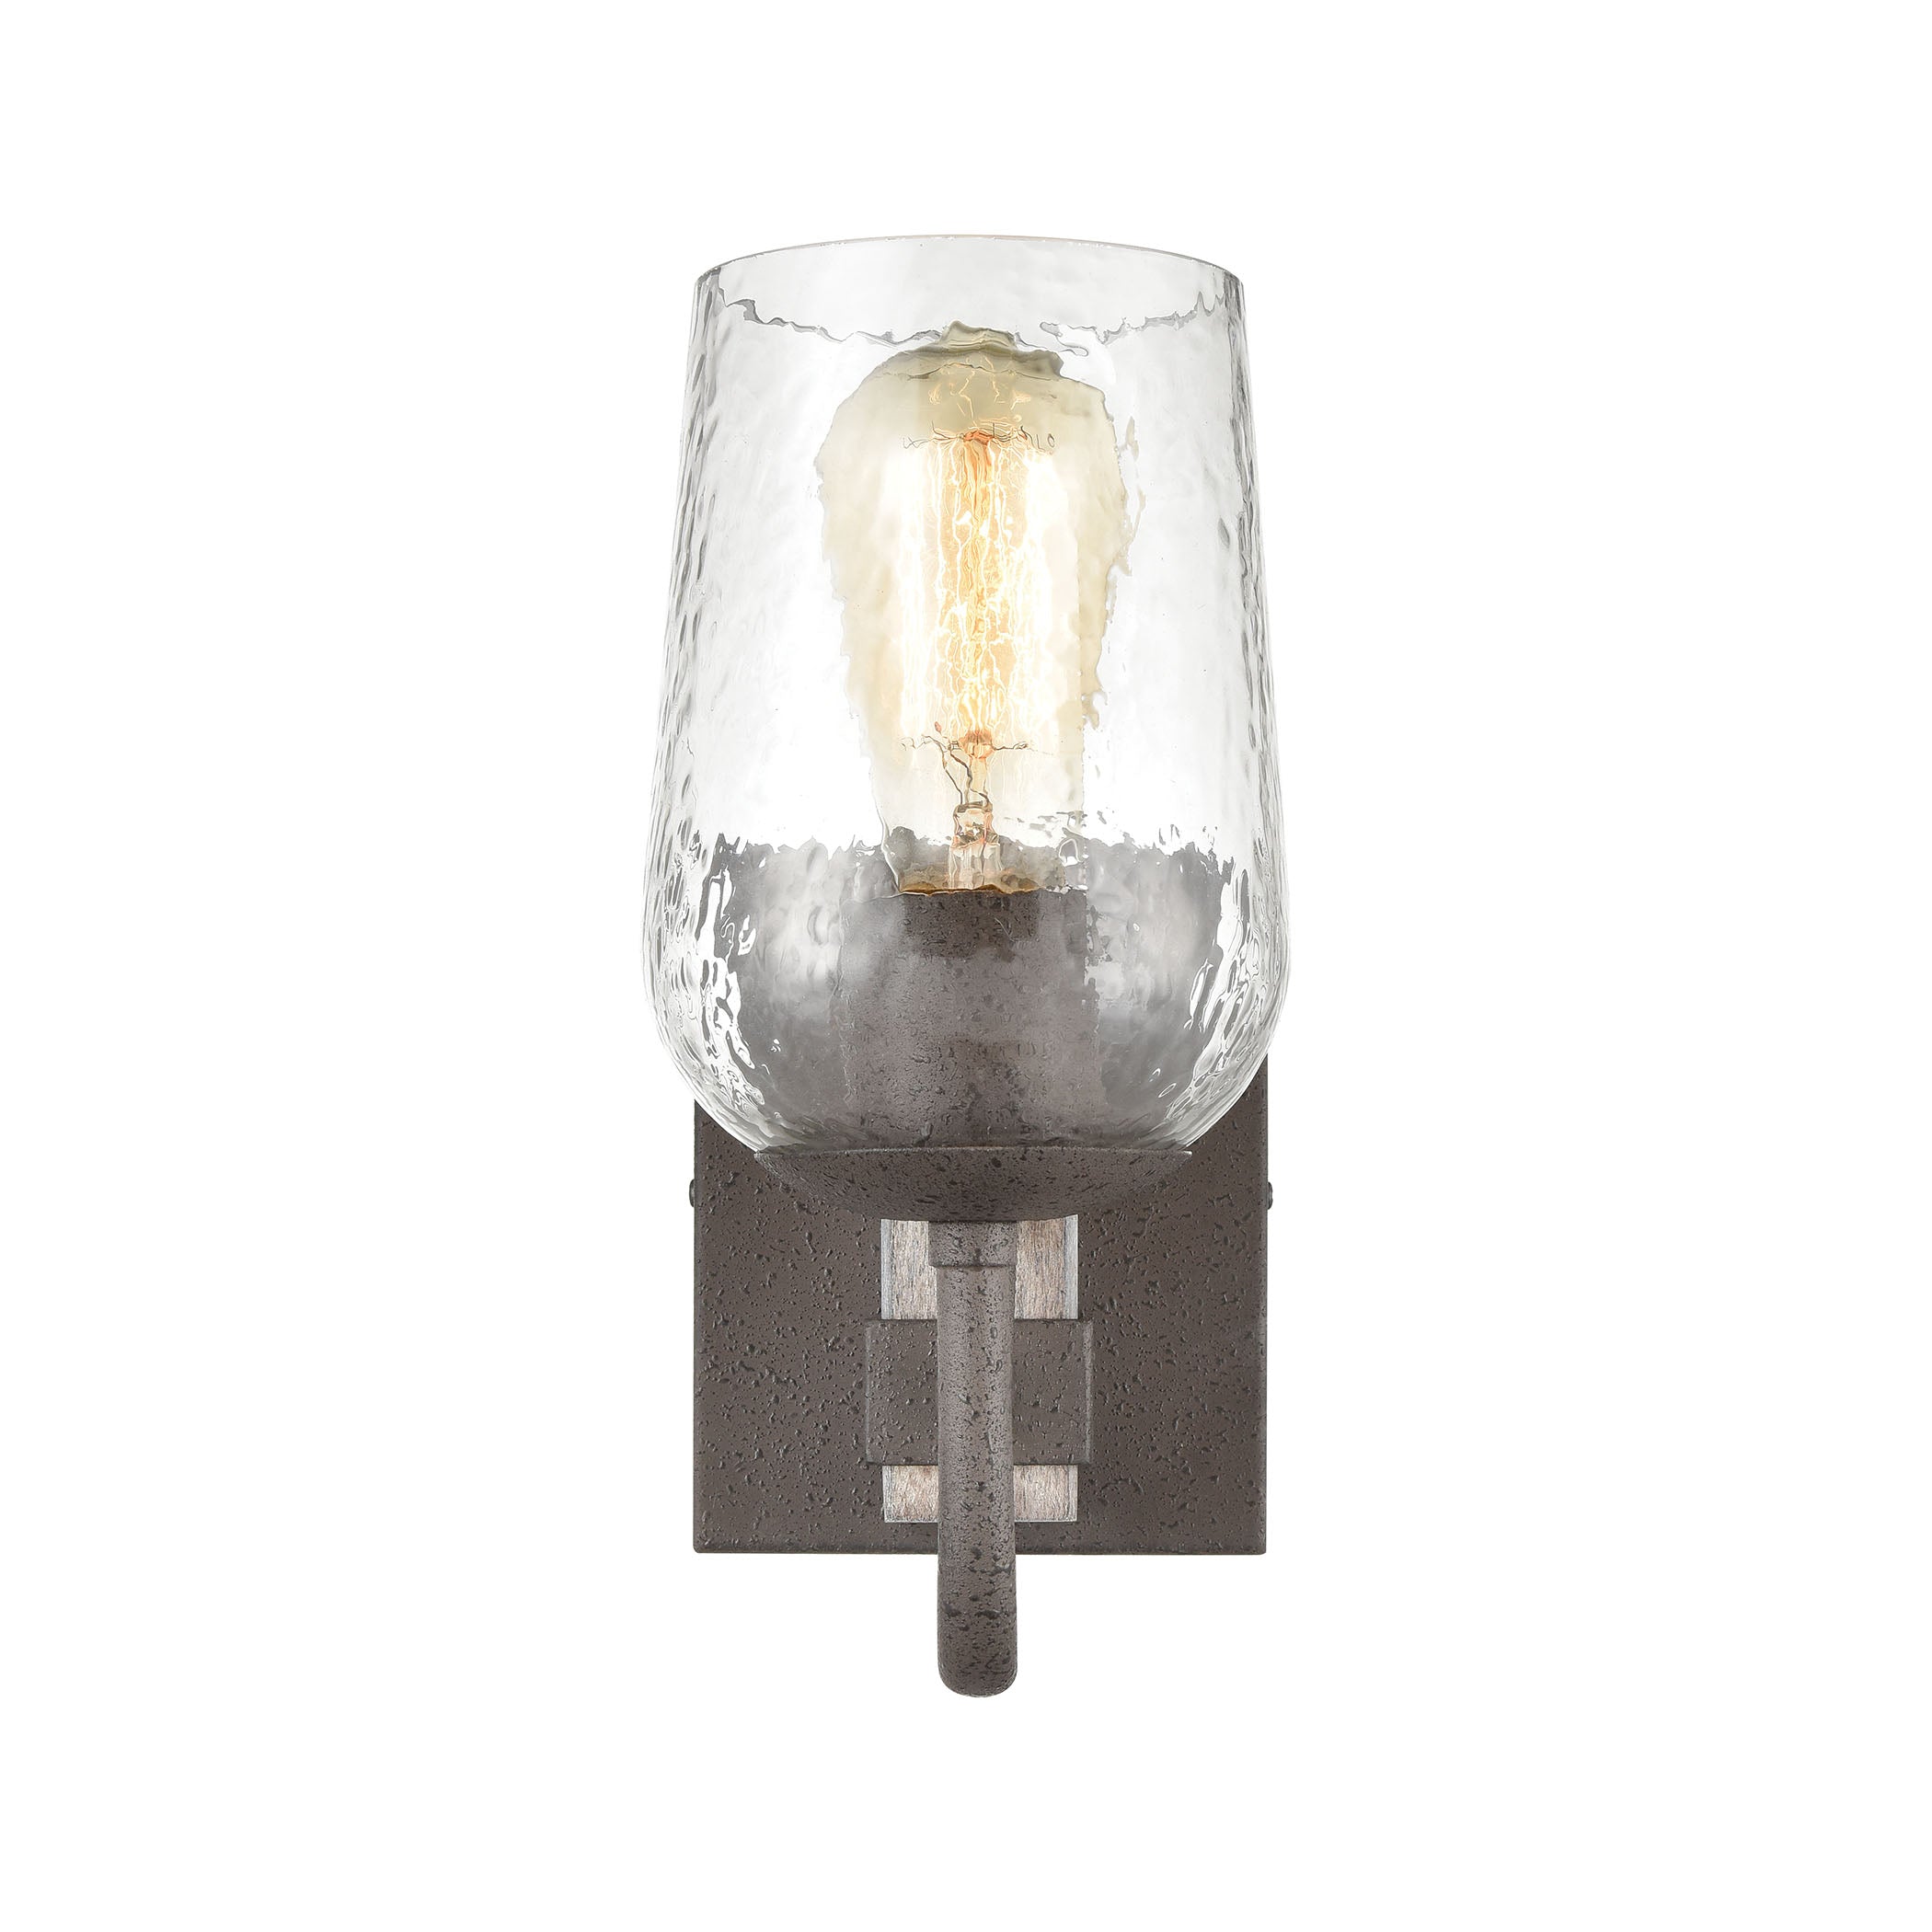 ELK Lighting 15370/1 Dillon 1-Light Vanity Light in Vintage Rust with Clear Hammered Glass